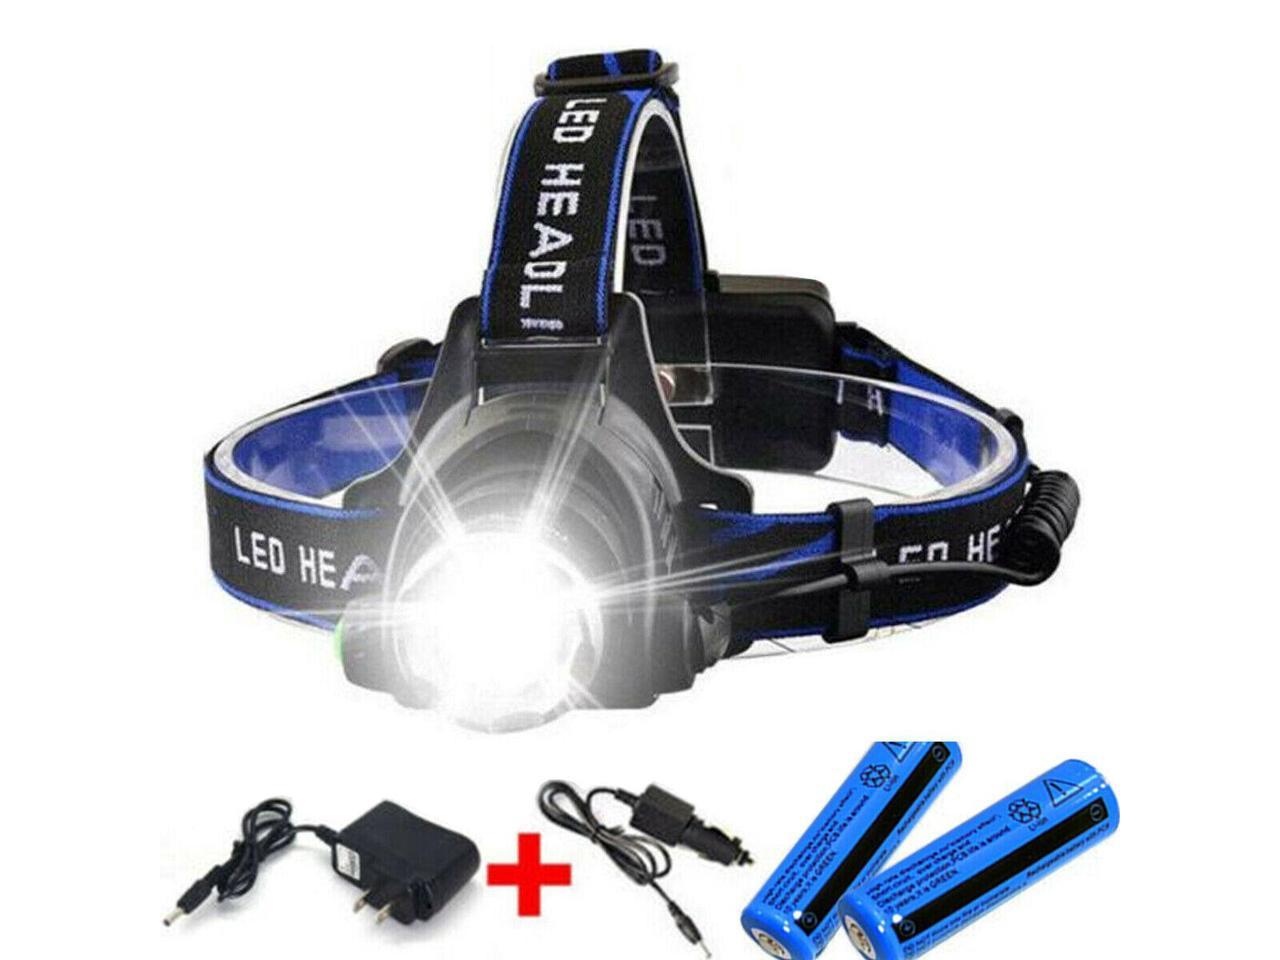 Rechargeable LED Headlamp Headlight Zoomable Head Torch Lamp Flashlight + Battery 